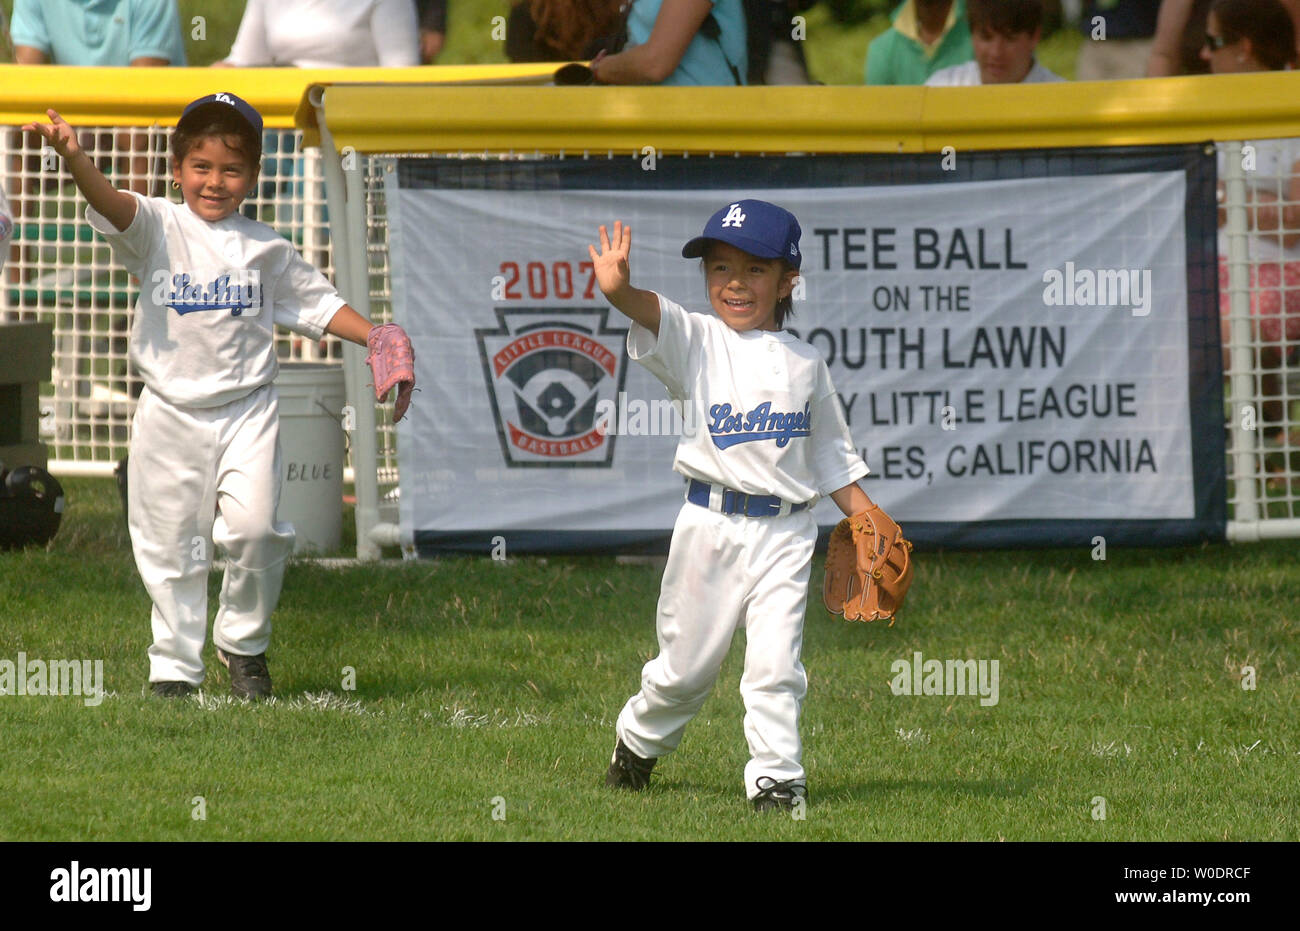 Members of the Wrigley Little League Dodgers of Los Angeles take to the  field during a tee ball game on the South Lawn of The White House in  Washington on July 15